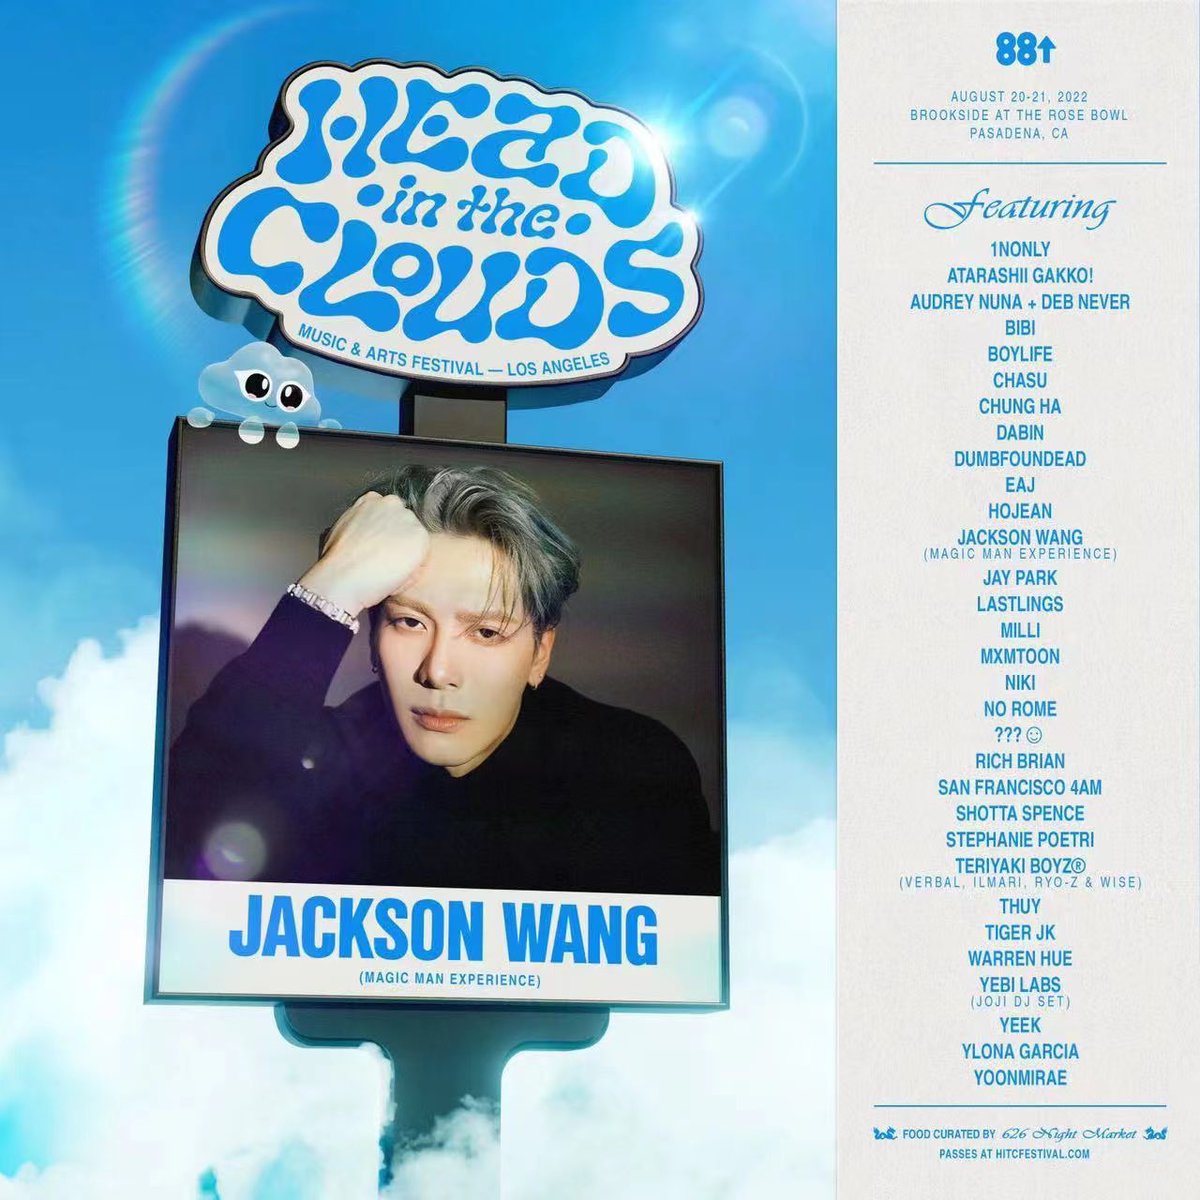 Jackson Wang on X: first access to 2-DAY passes starts now   🎟️ #MAGICMAN Now coming . @88rising @hitcfestival  @goldenvoice . Payment Plan is available . #88rising #hitcfestival # jacksonwang #잭슨 #王嘉爾 #TEAMWANGrec